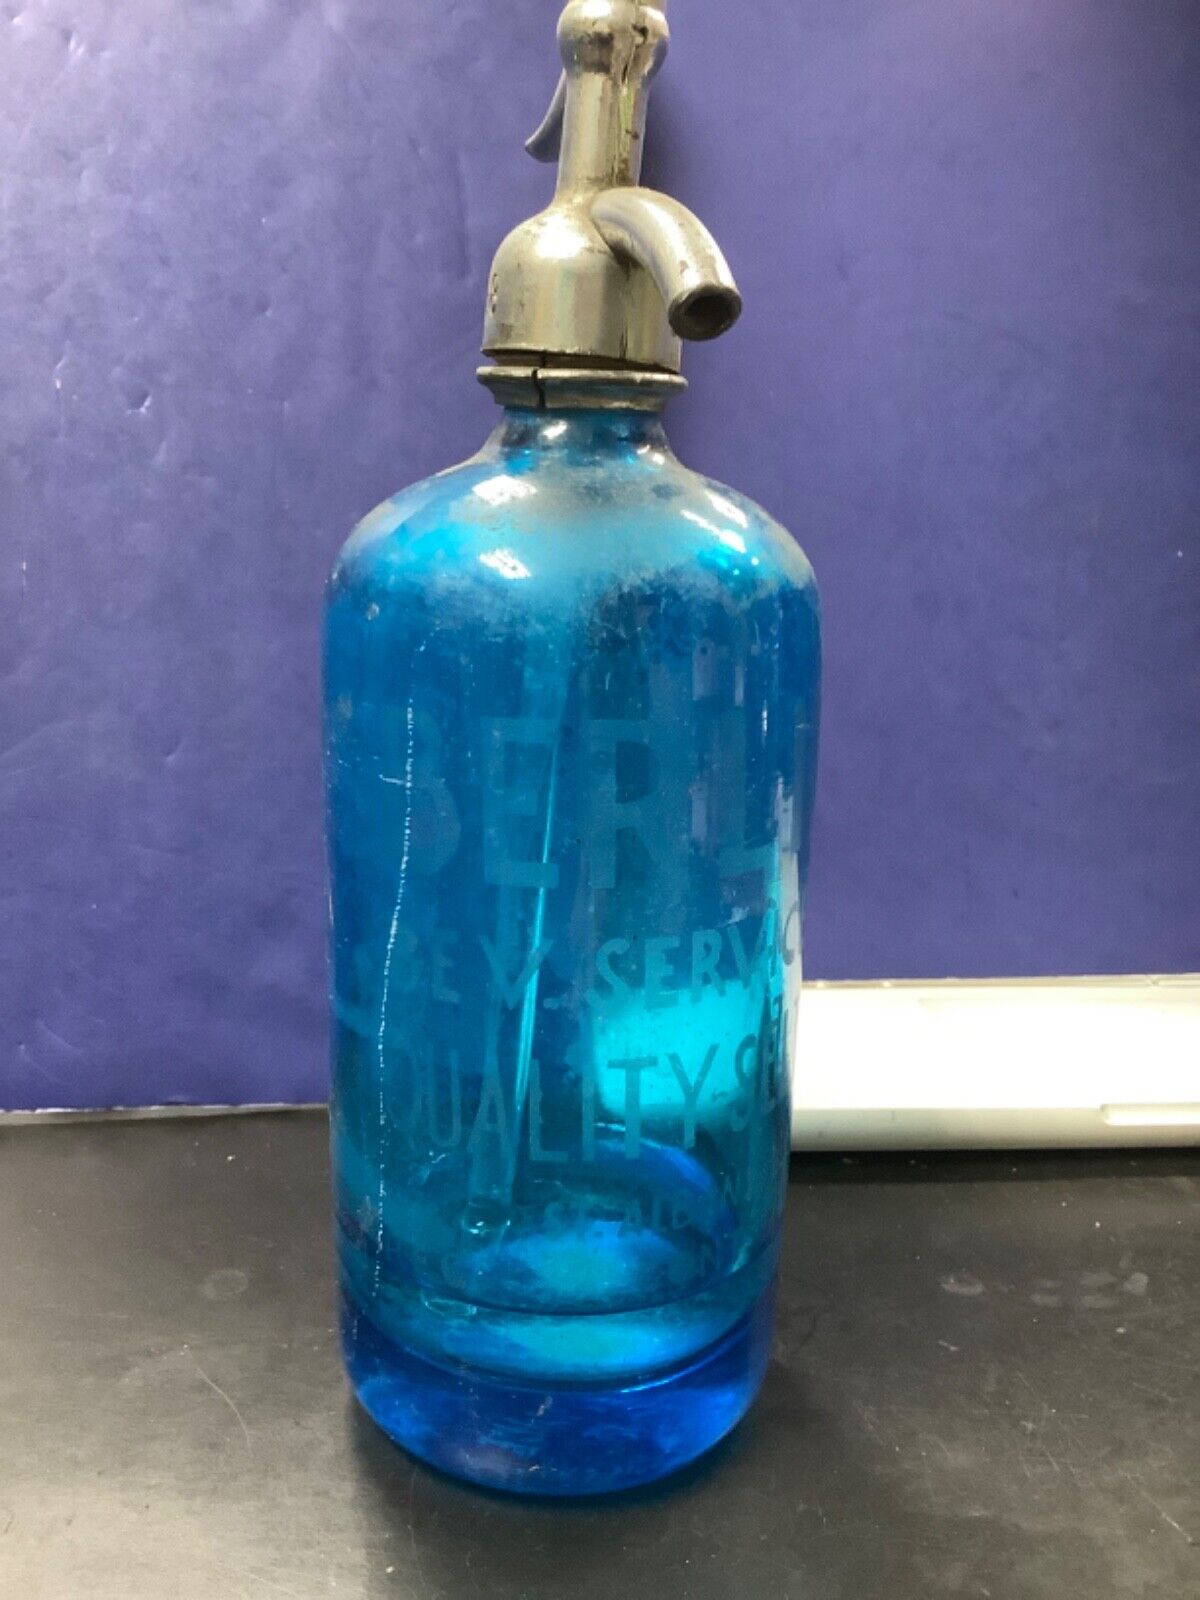 Vintage berlin bev. service inc quality seltzer blue bottle - preowned as is 